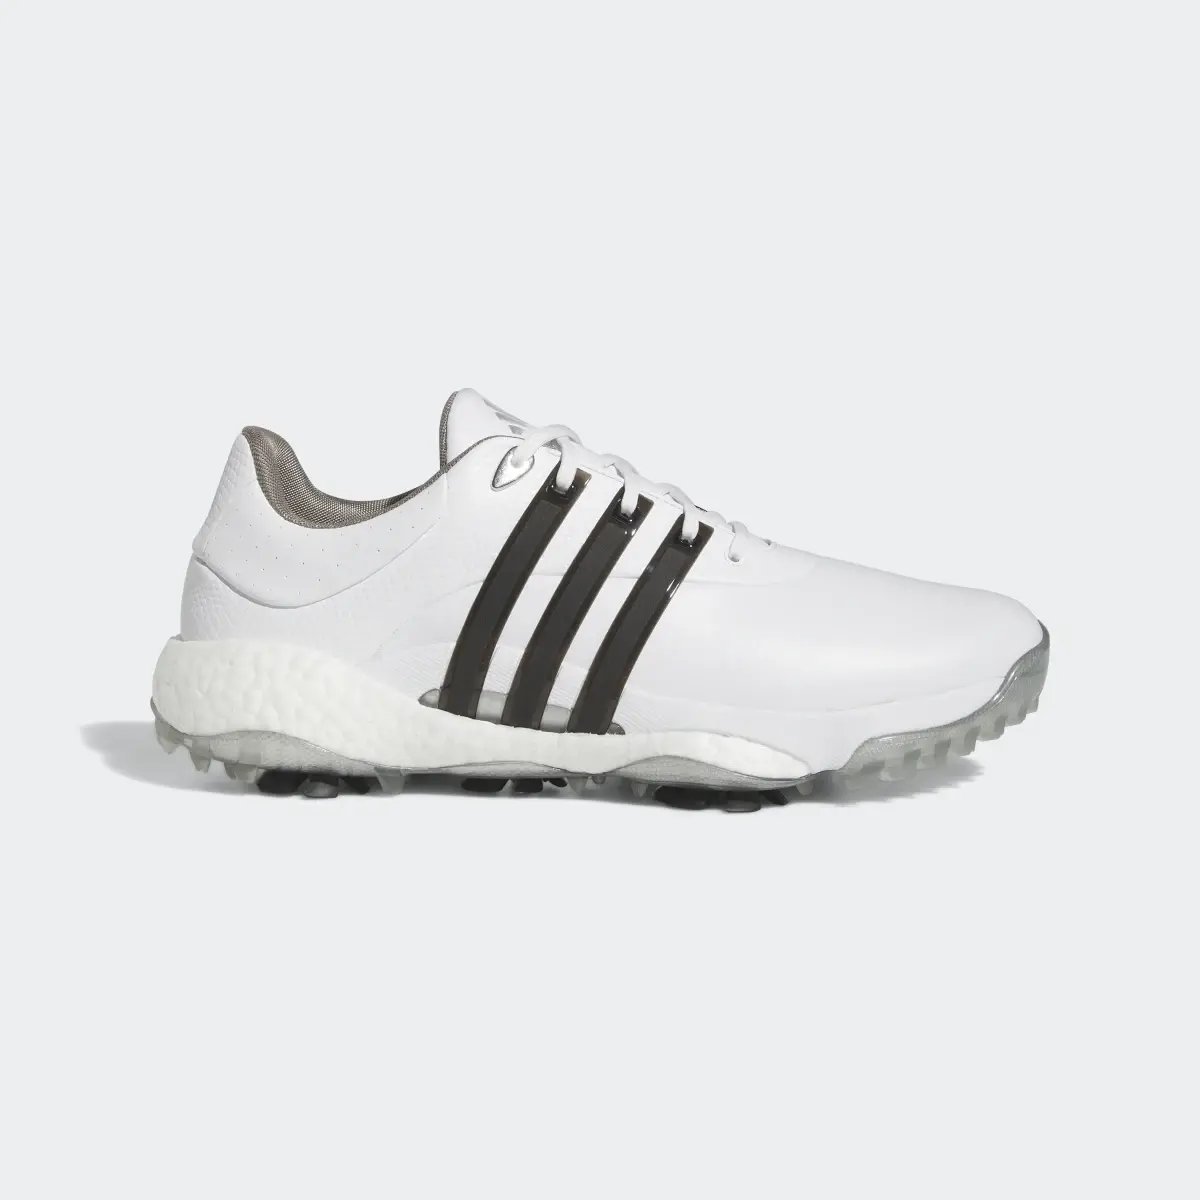 Adidas Tour360 22 BOOST Golf Shoes. 2